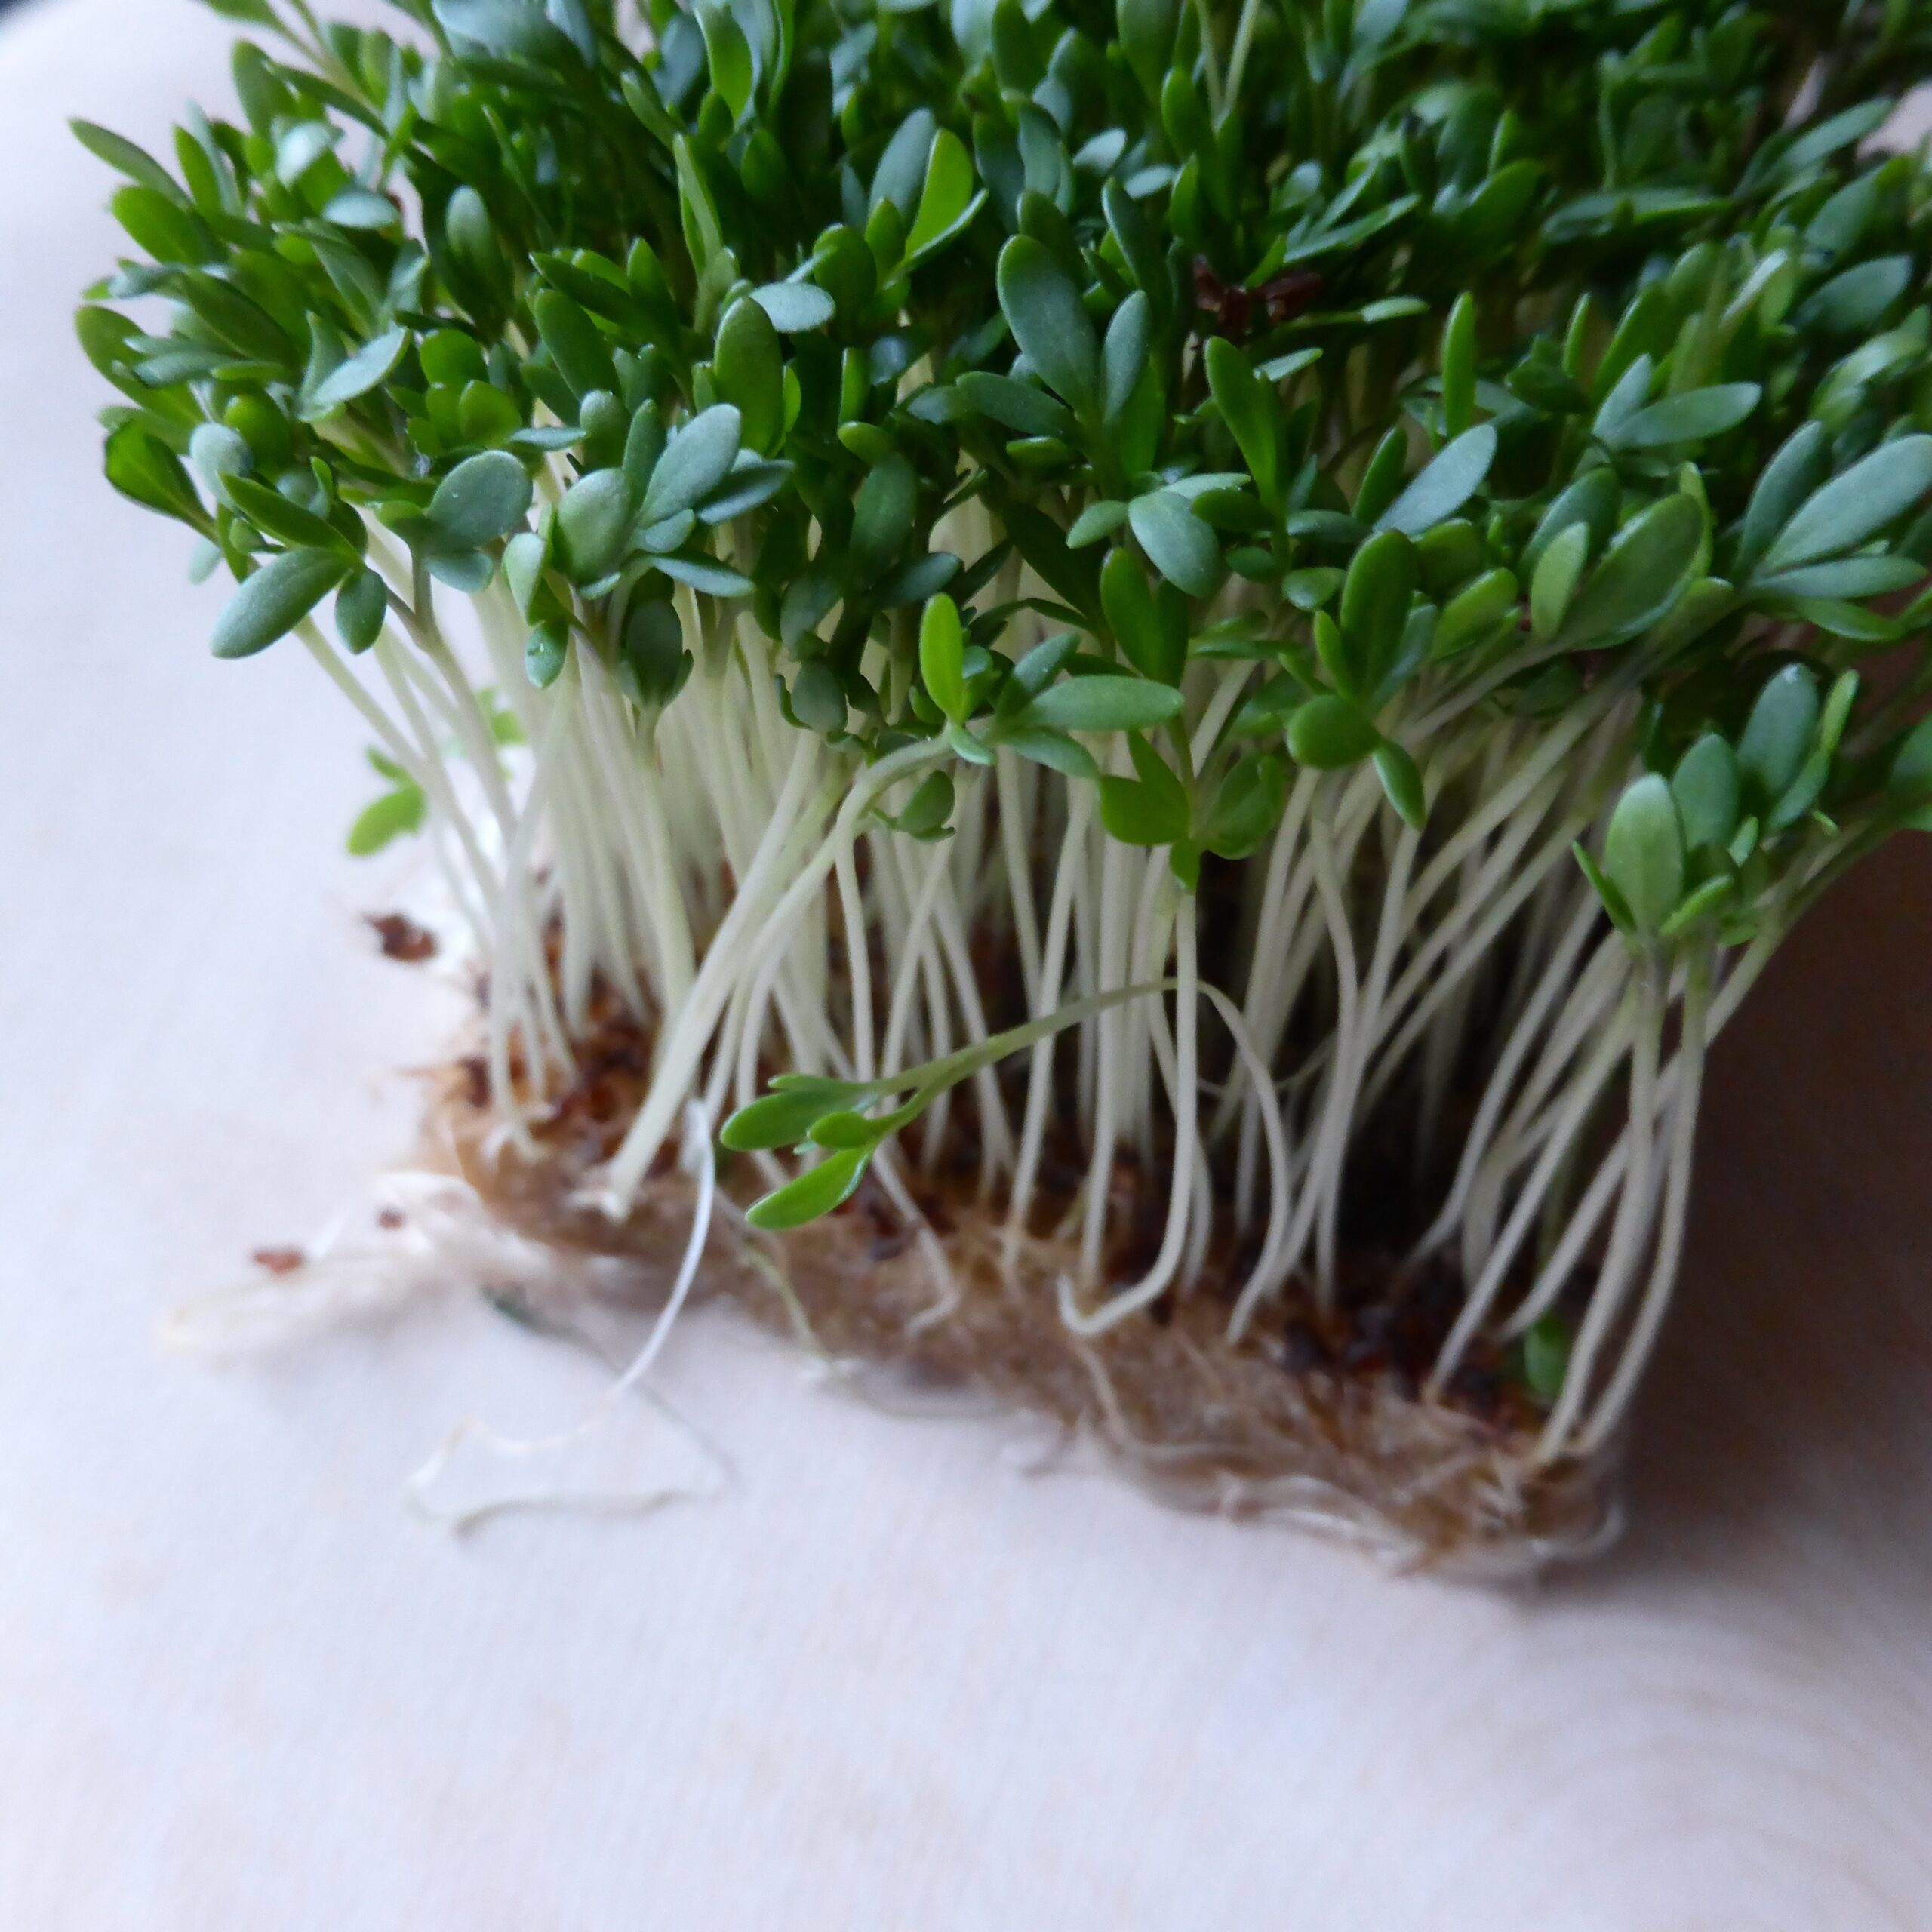 Broccoli Sprouts, Bean sprouts, how long do bean sprouts last?